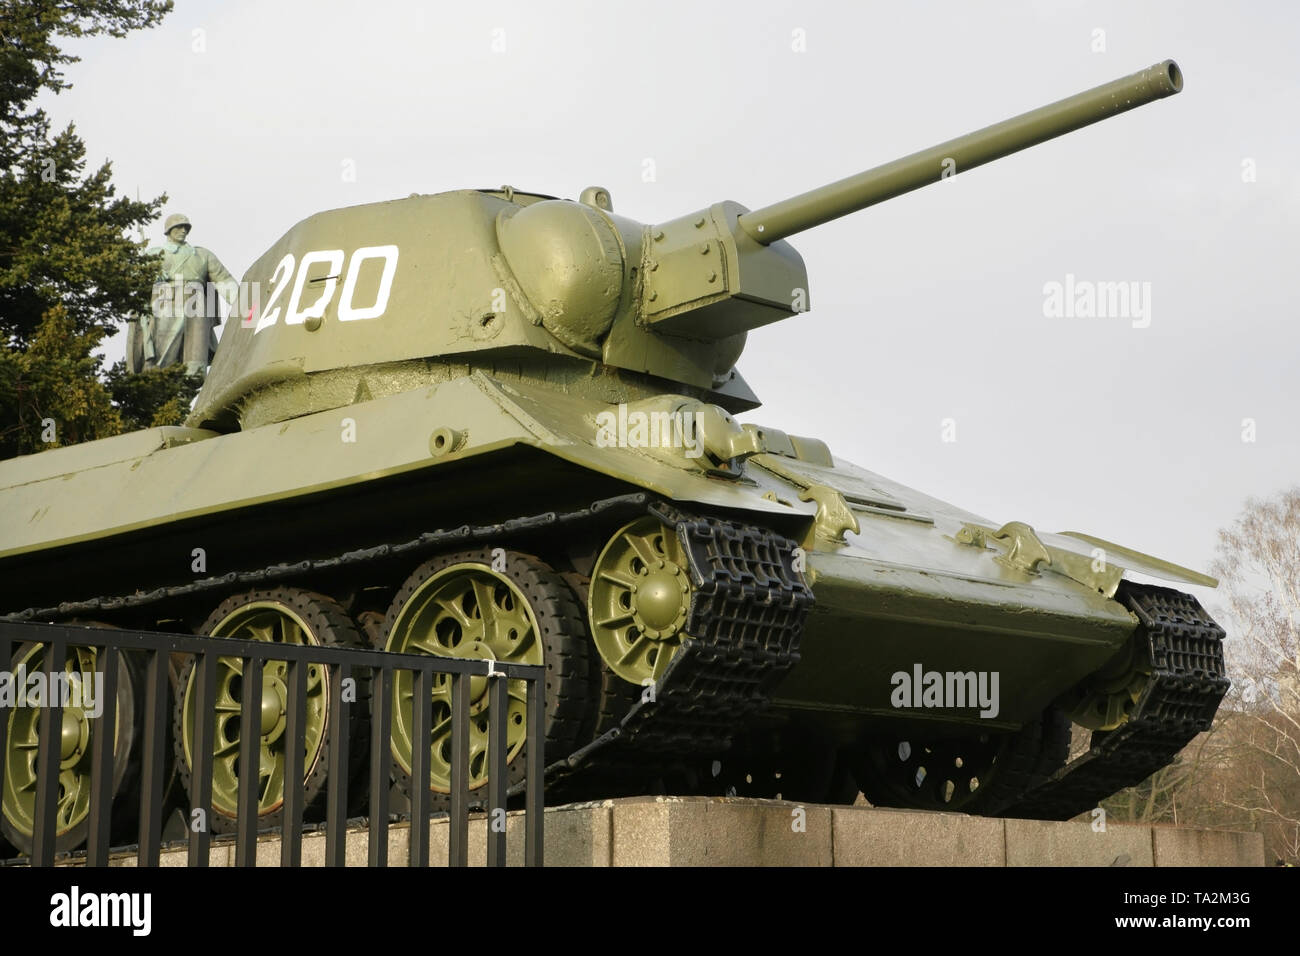 Russian T-34 tank at the Soviet War Memorial, Tiergarten Berlin, Germany which commemorates Soviet losses during the Battle of Berlin in World War 2. Stock Photo